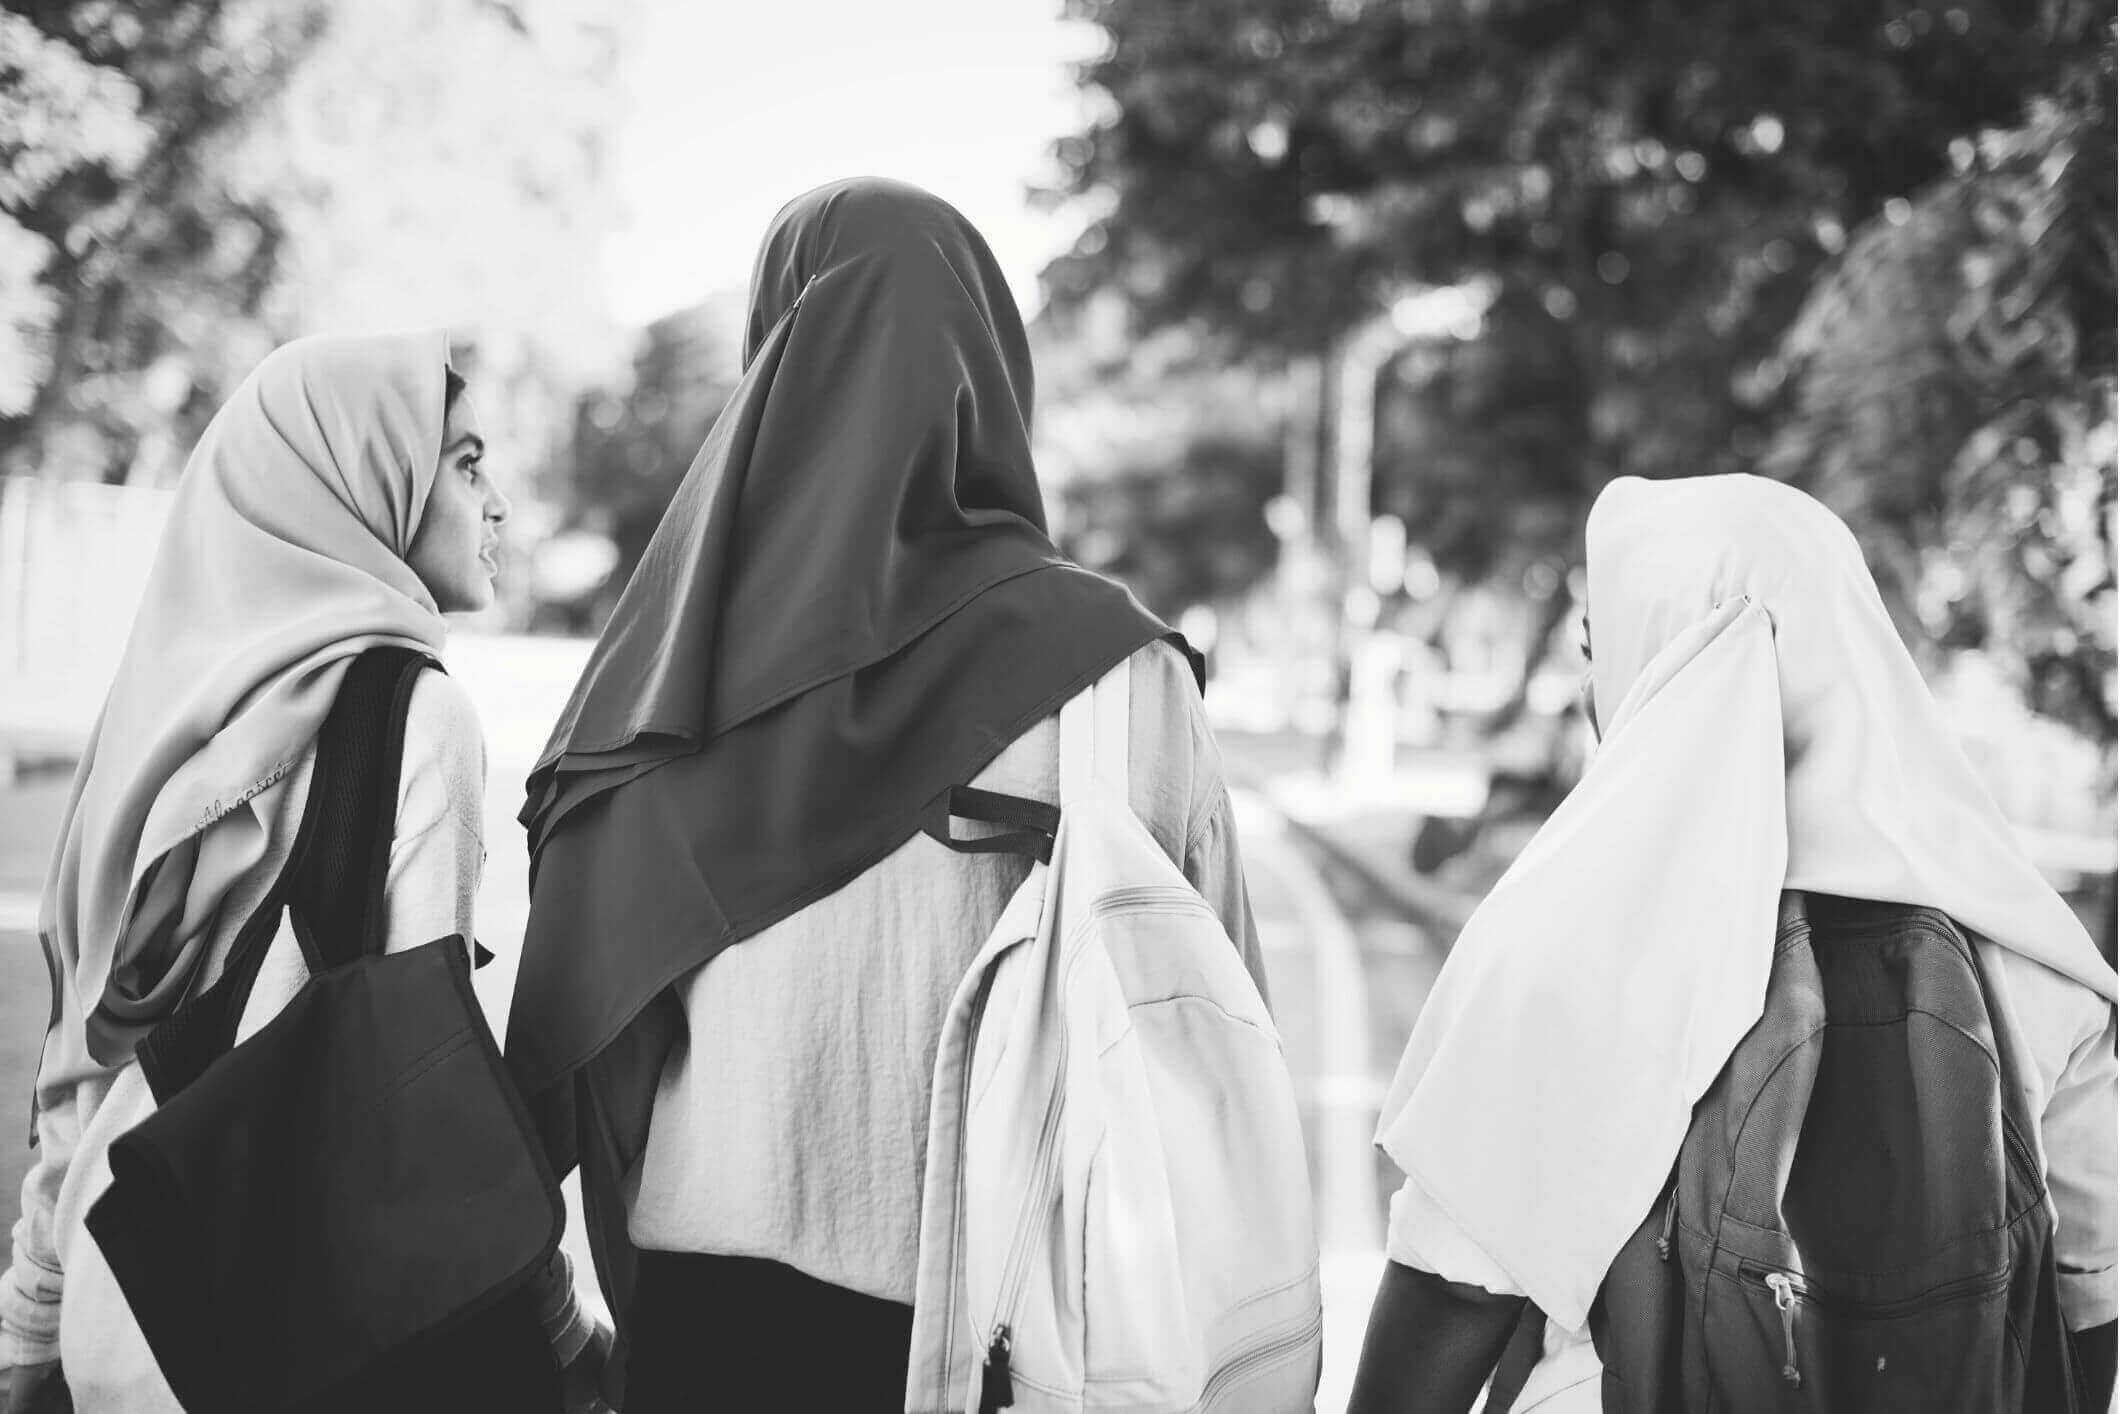 UN Scolds France For Islamic Hijab Ban